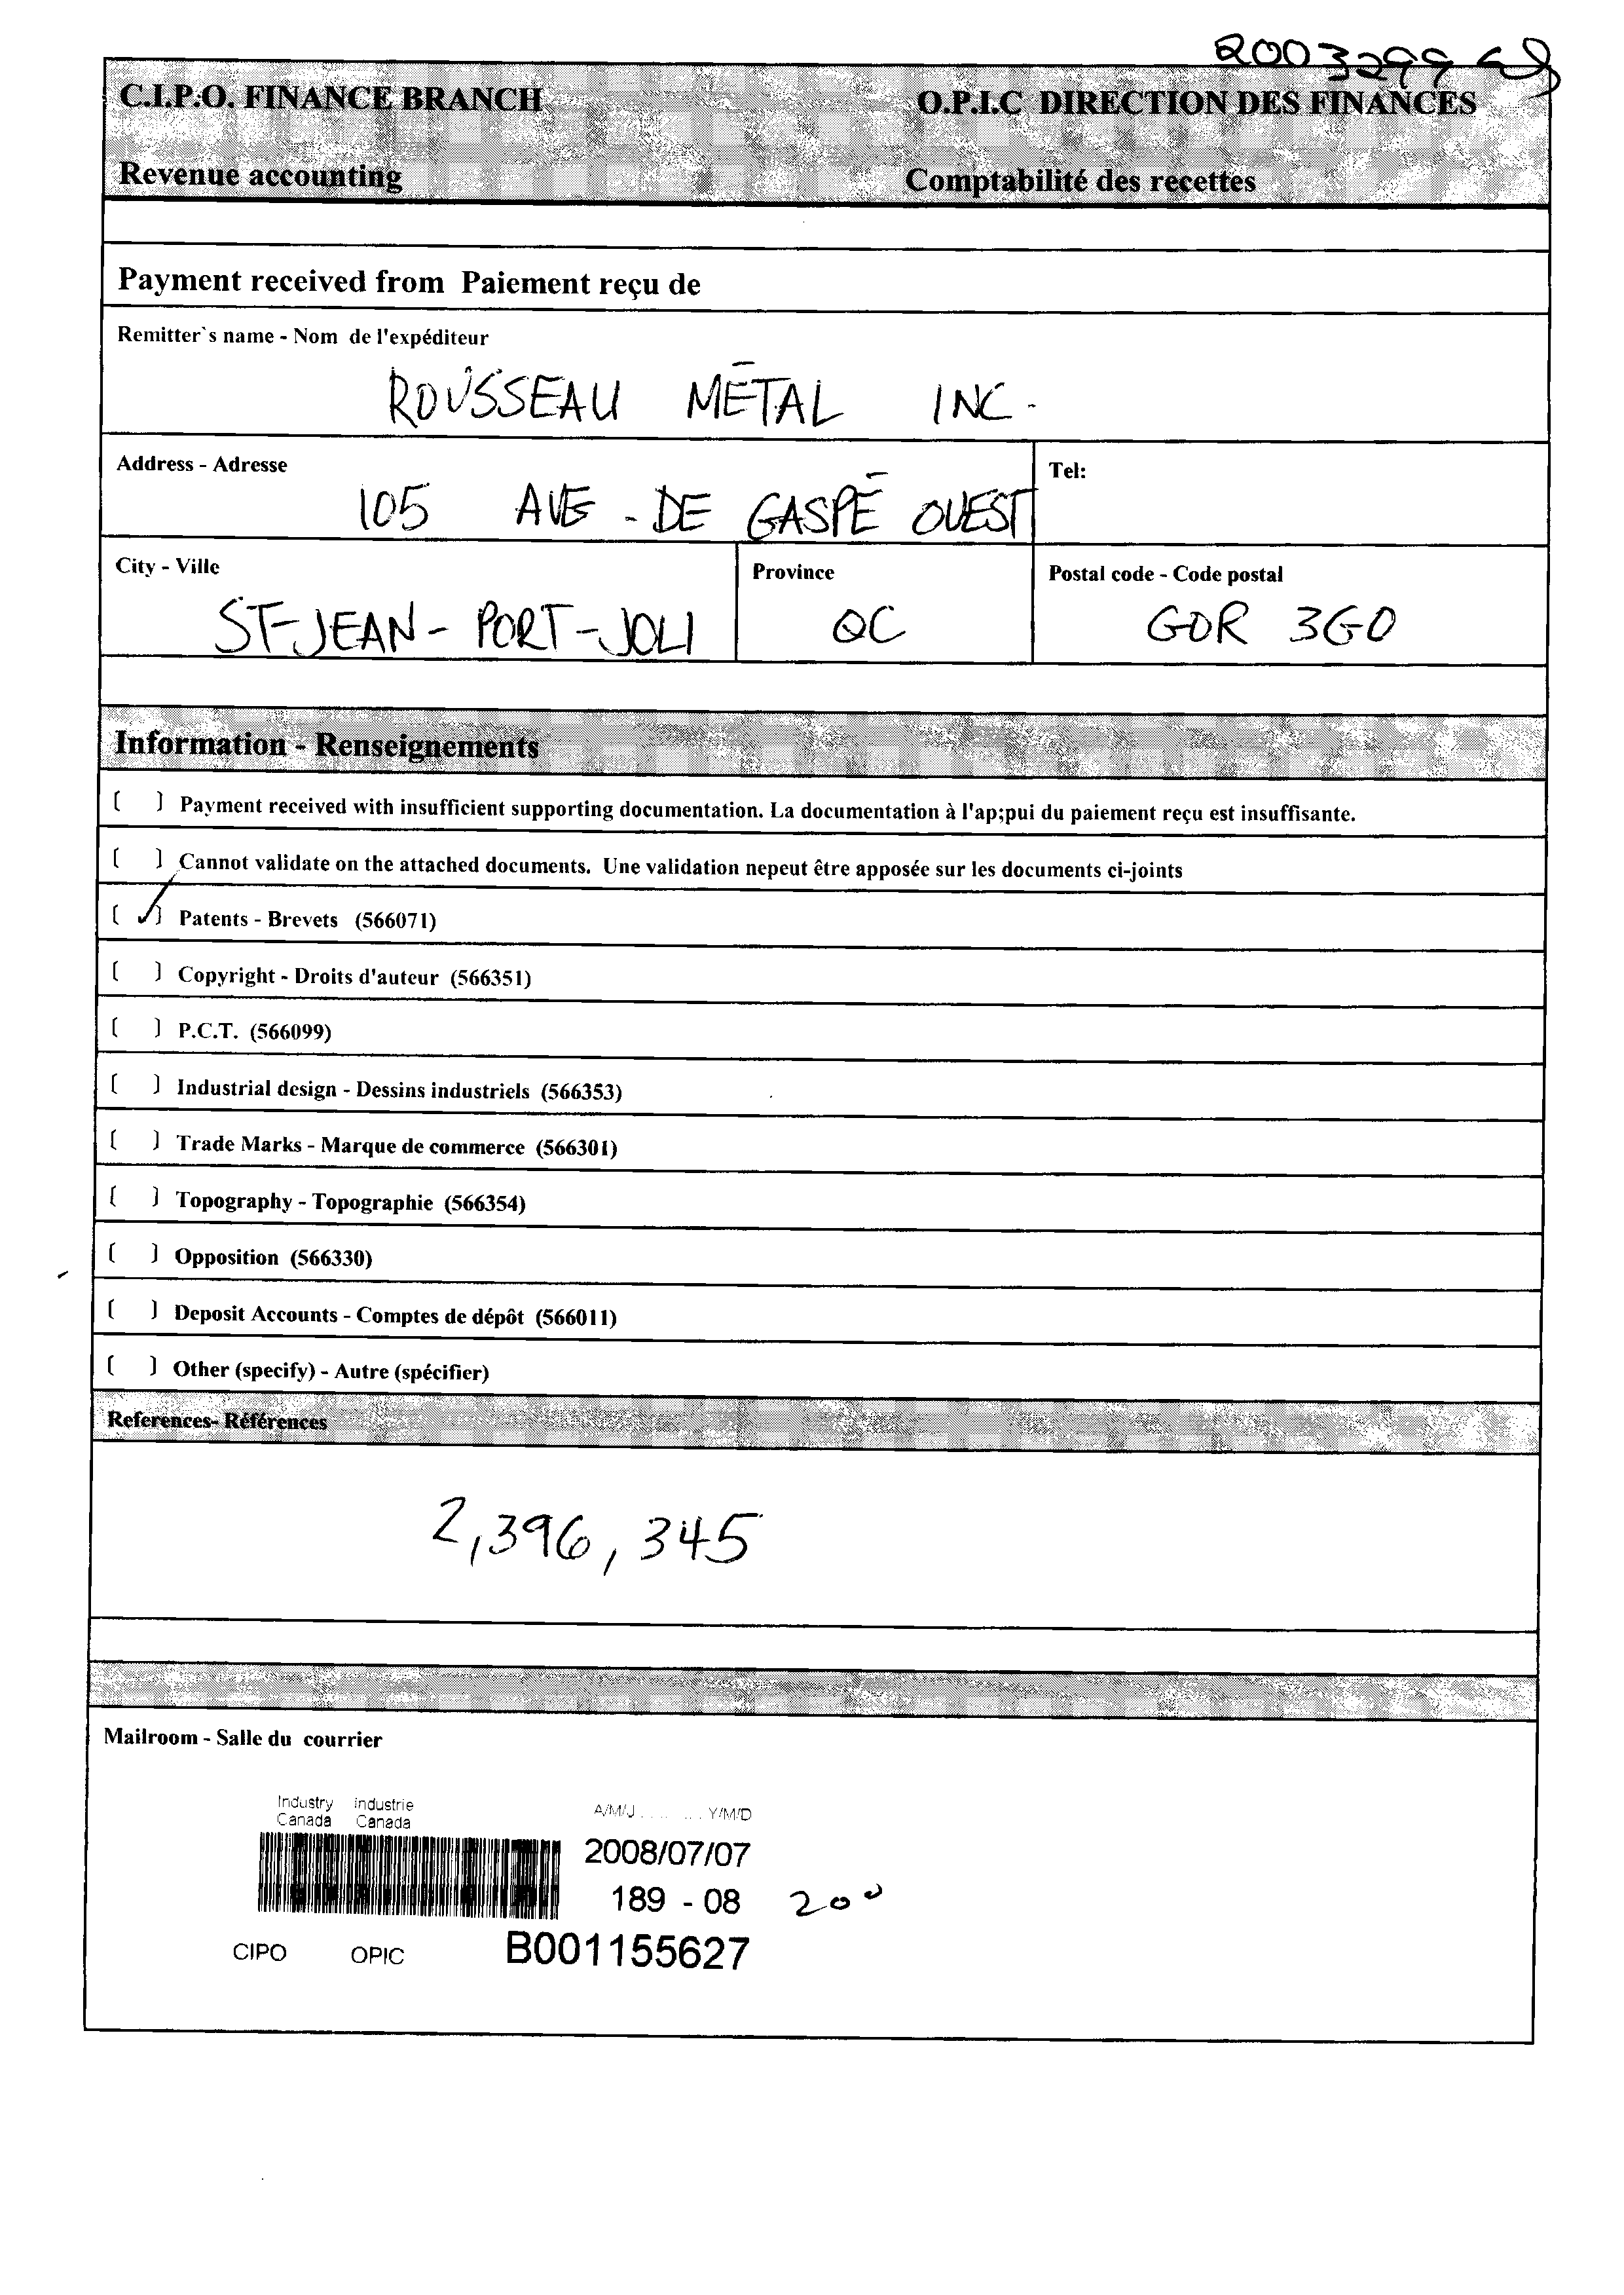 Canadian Patent Document 2396345. Fees 20080707. Image 1 of 2